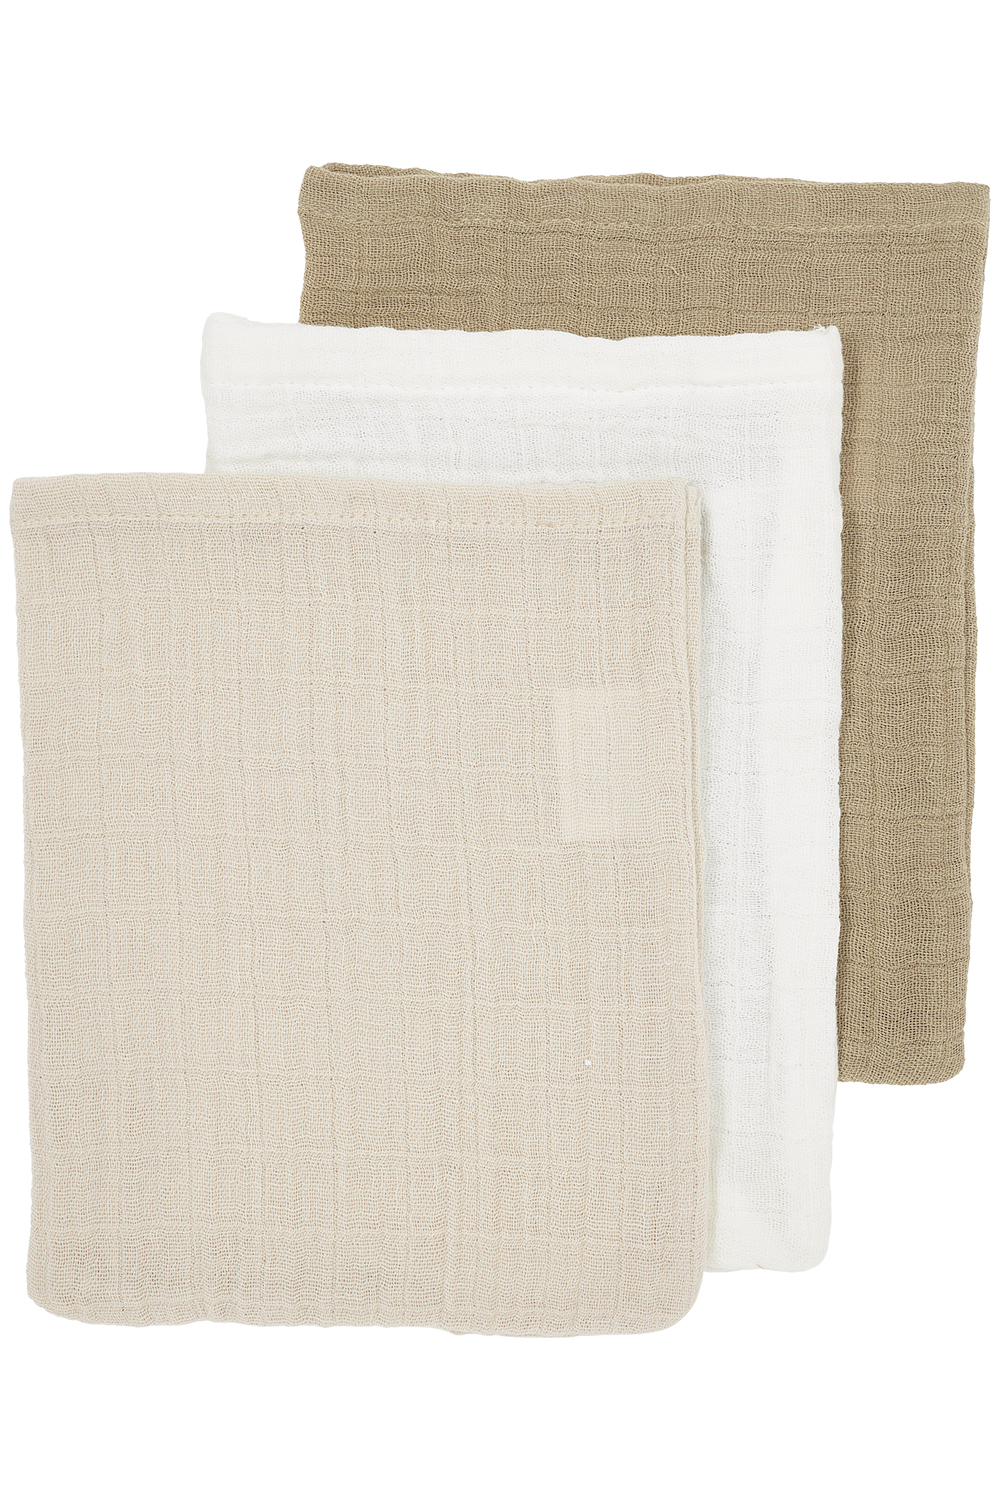 Waschhandschuhe 3er pack pre-washed musselin Uni - offwhite/soft sand/taupe - 20x17cm